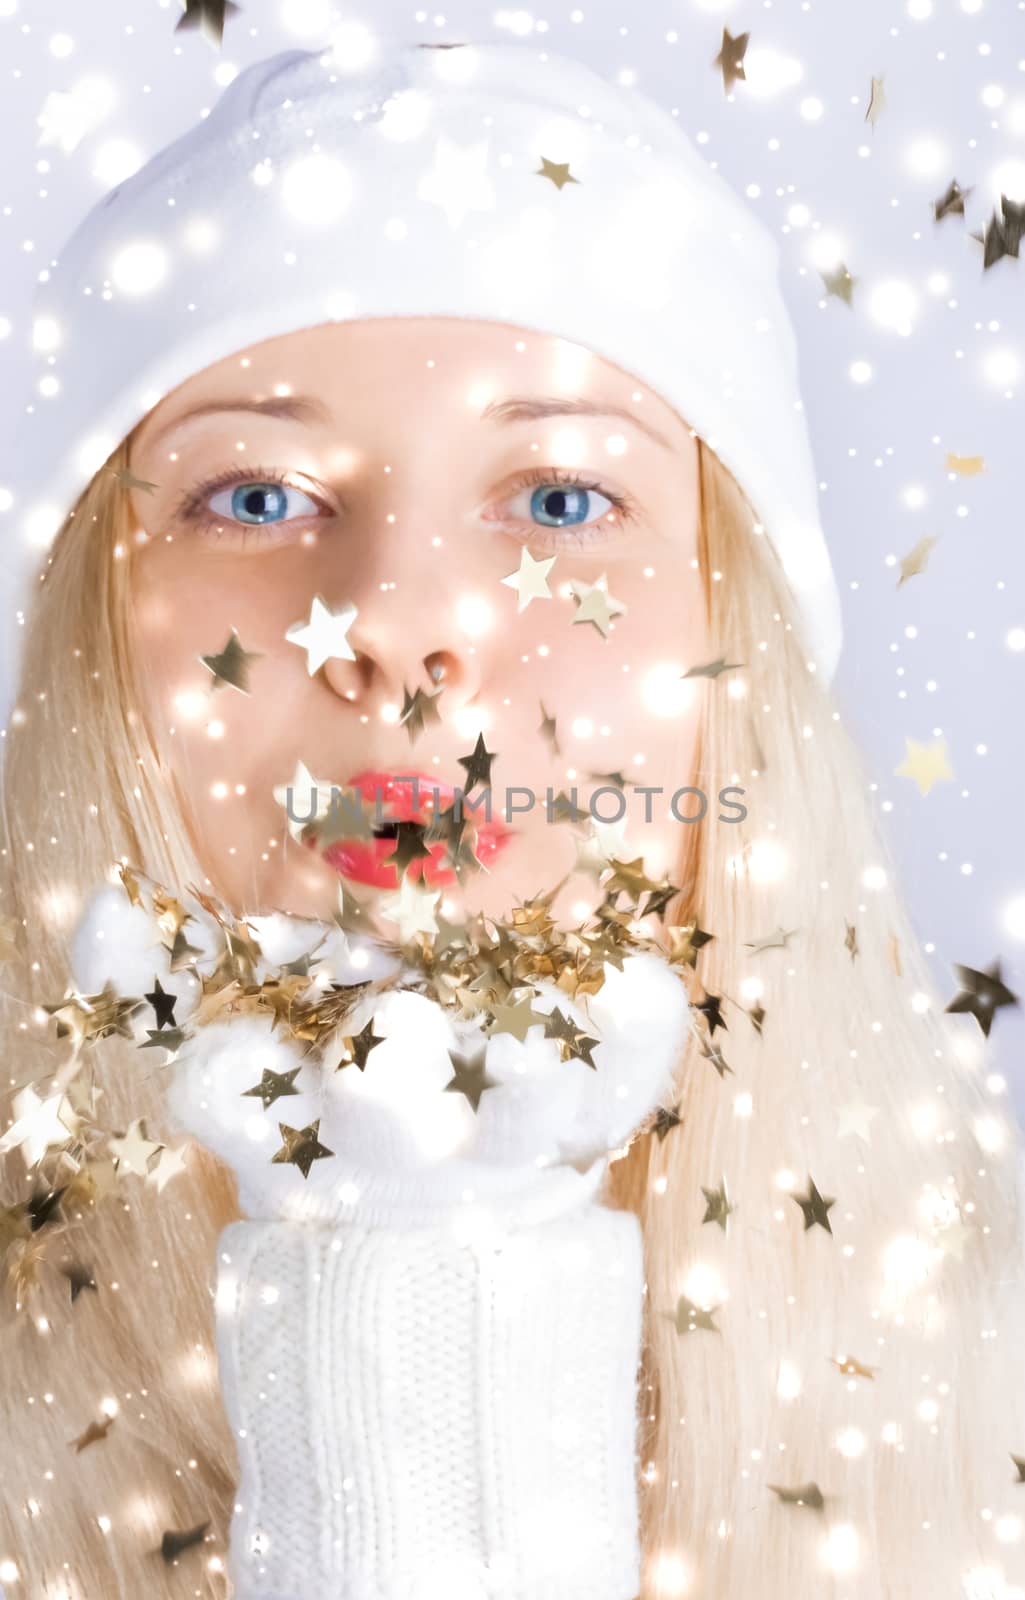 Shiny Christmas and glitter snow background, blonde woman with positive emotion in winter season for shopping sale and holiday brands